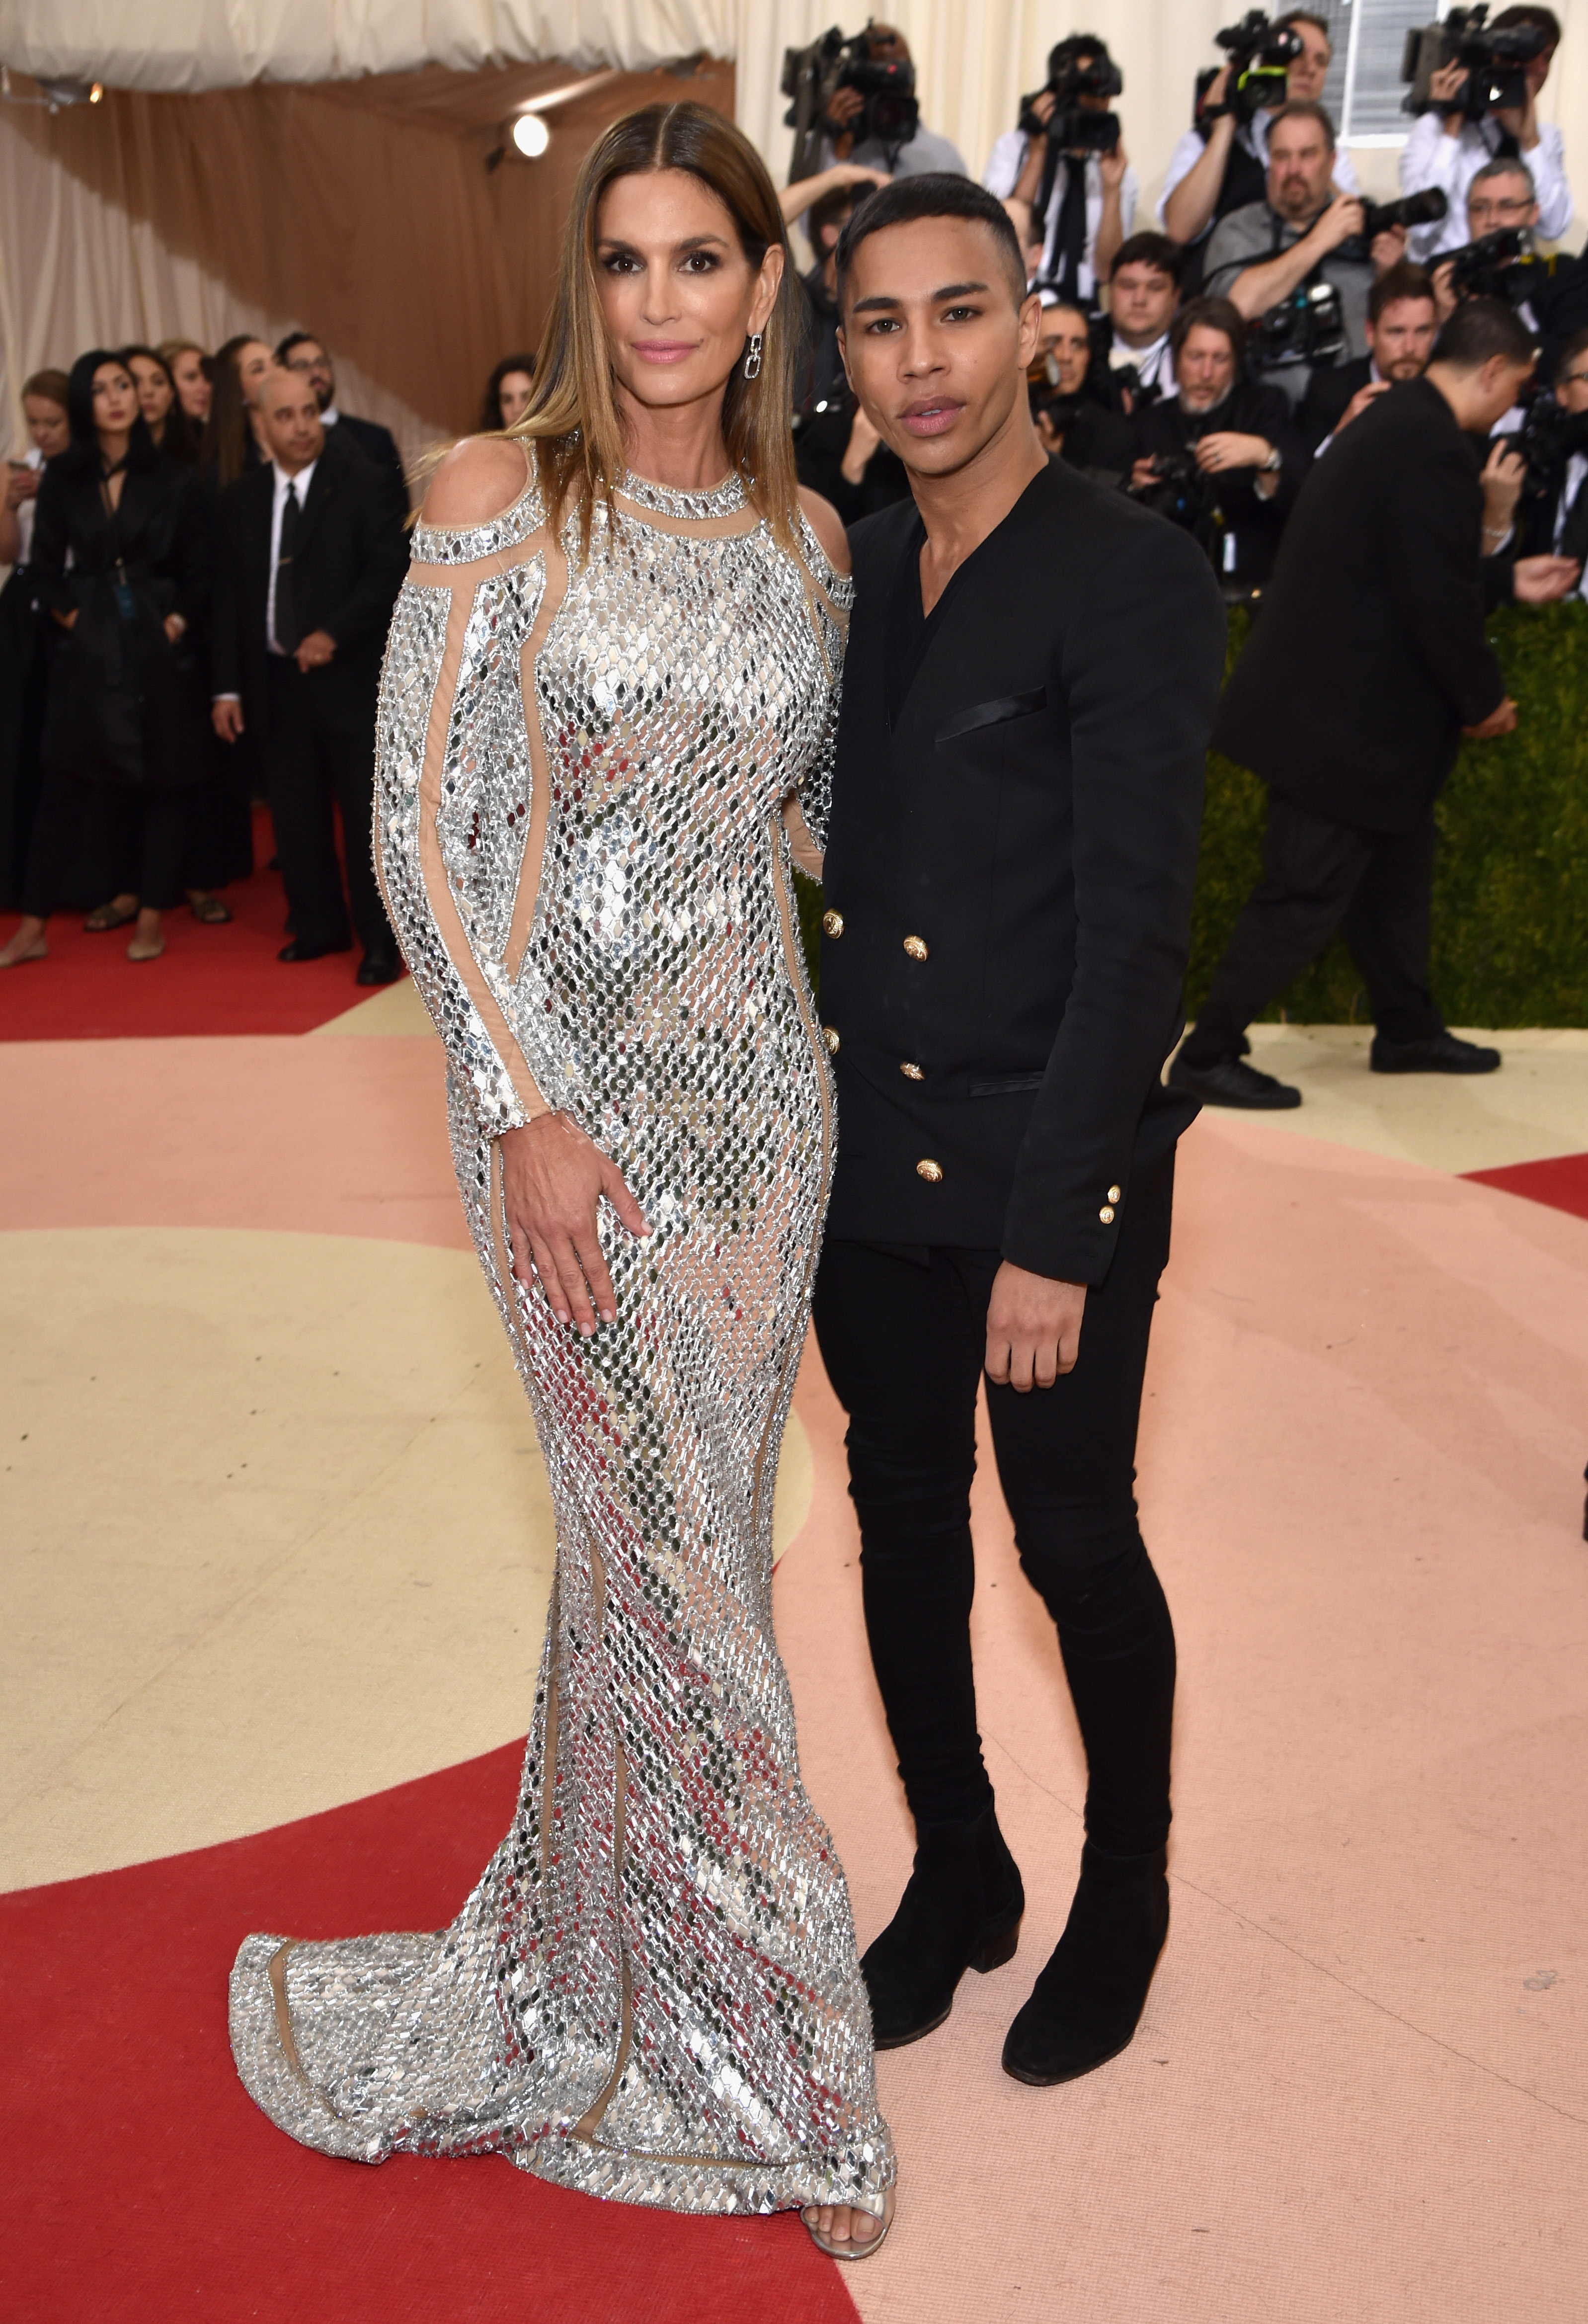 Cindy Crawford and designer Olivier Rousteing attend  Manus x Machina: Fashion In An Age Of Technology  Costume Institute Gala at Metropolitan Museum of Art on May 2, 2016 in New York City.